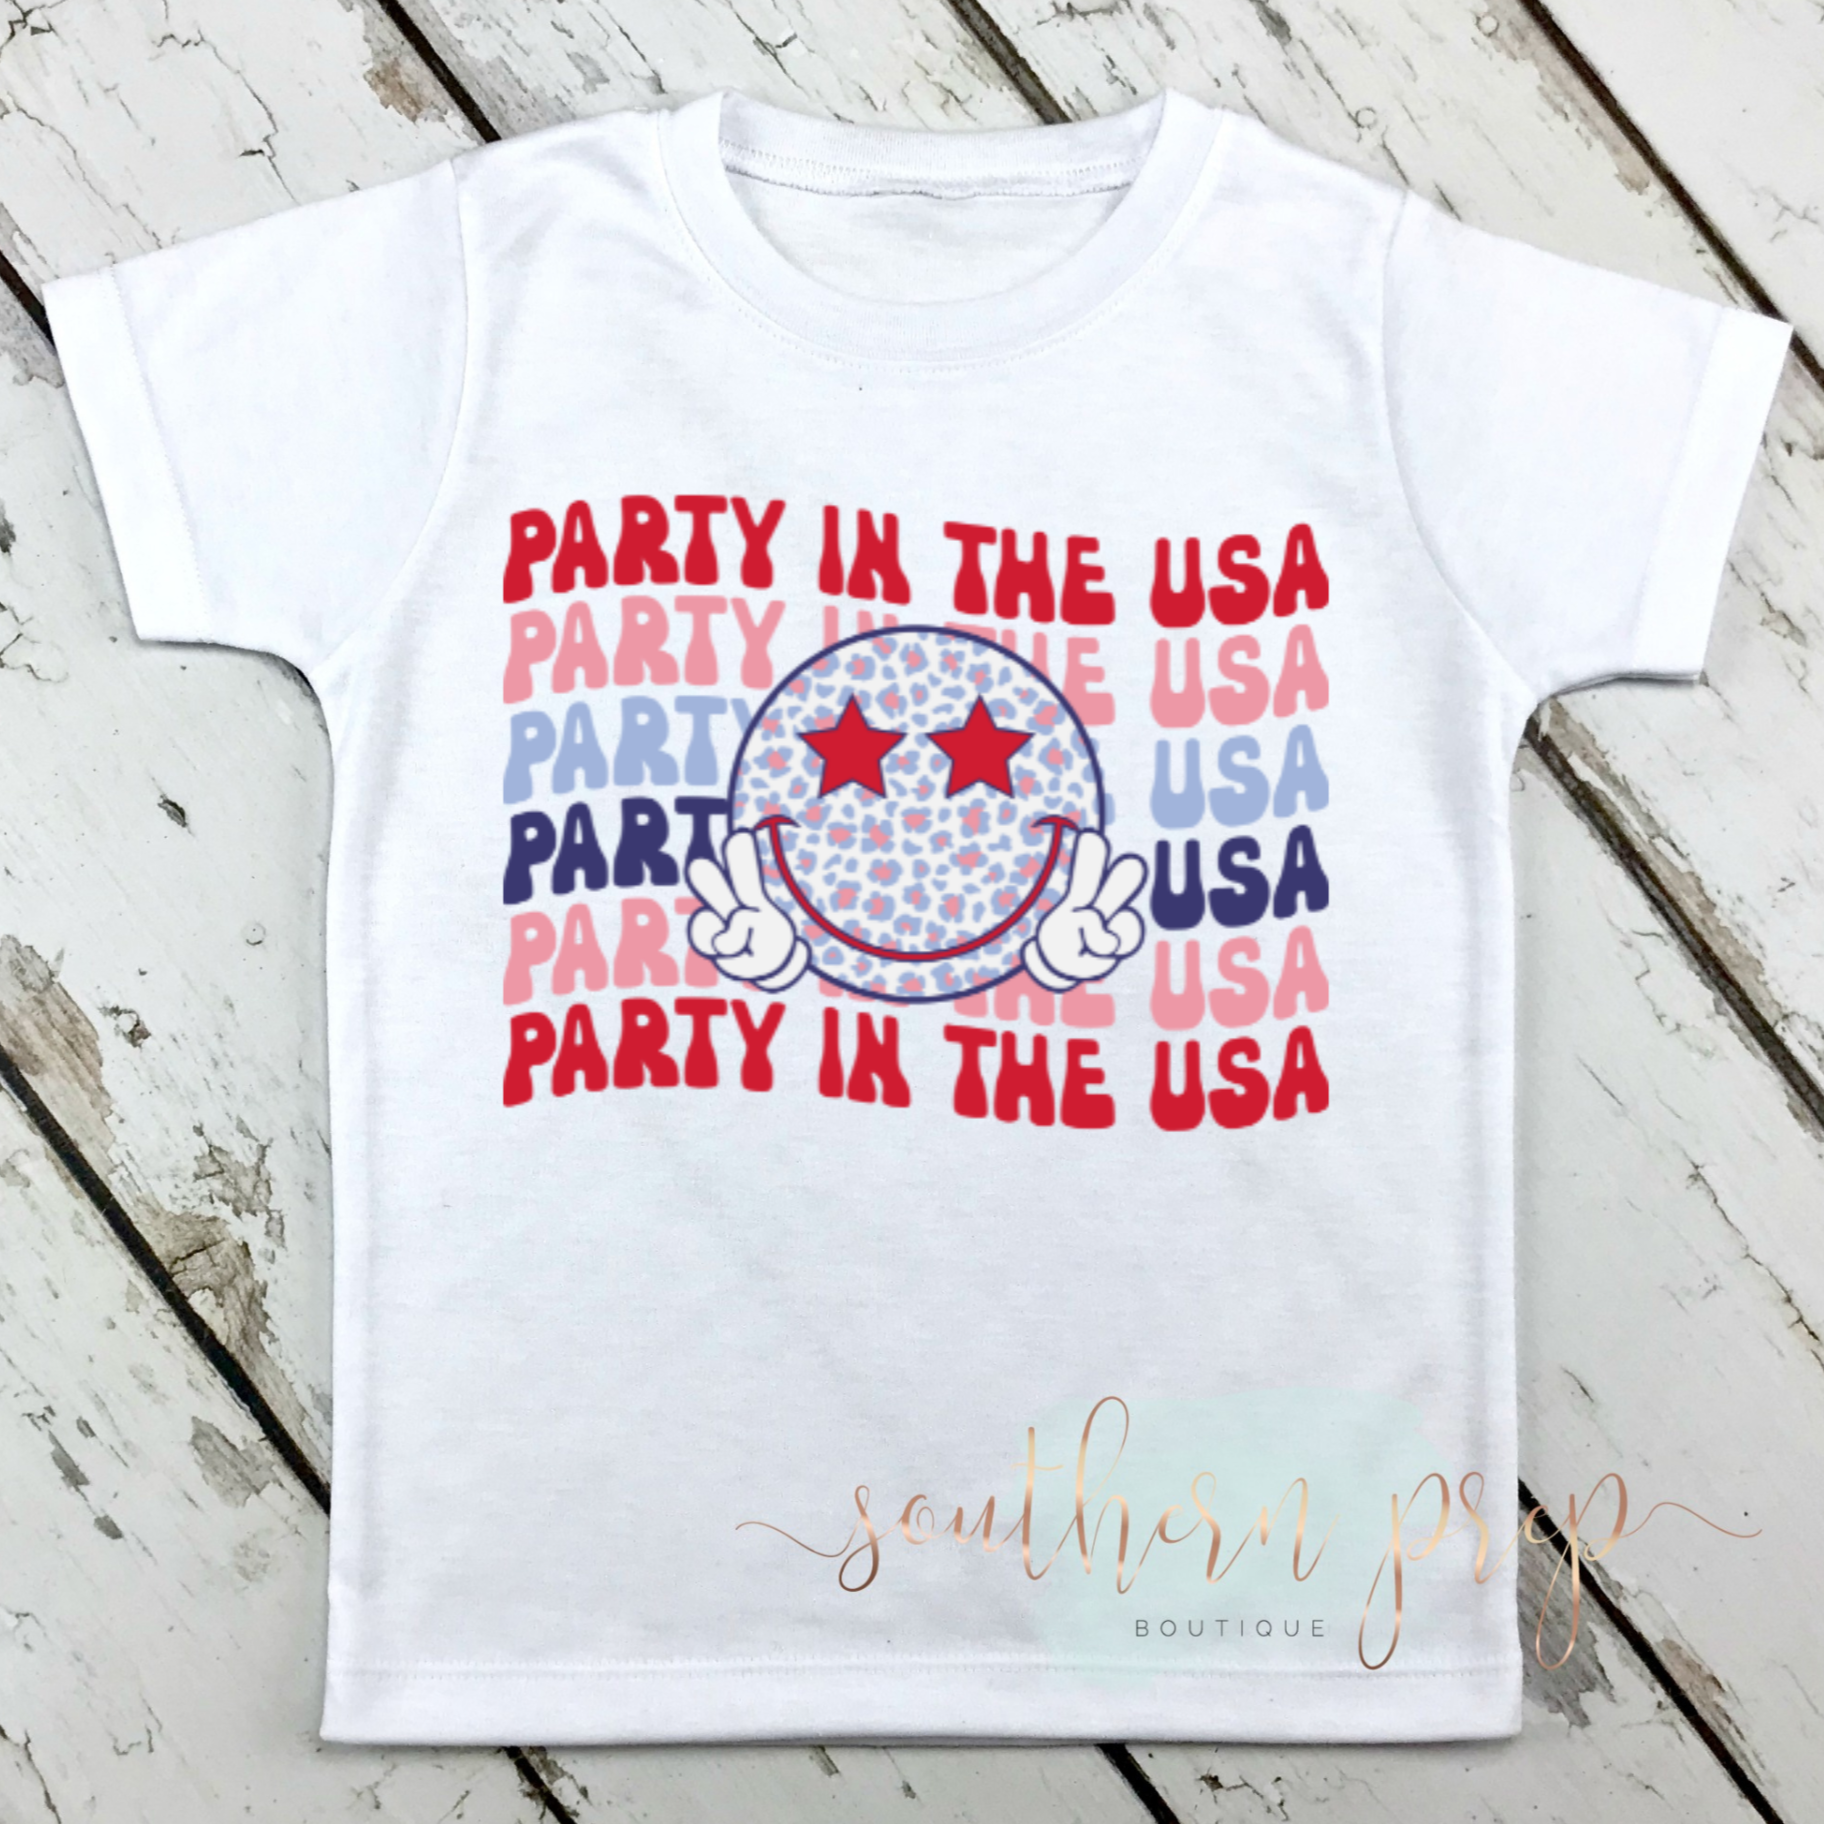 11. Party In The USA